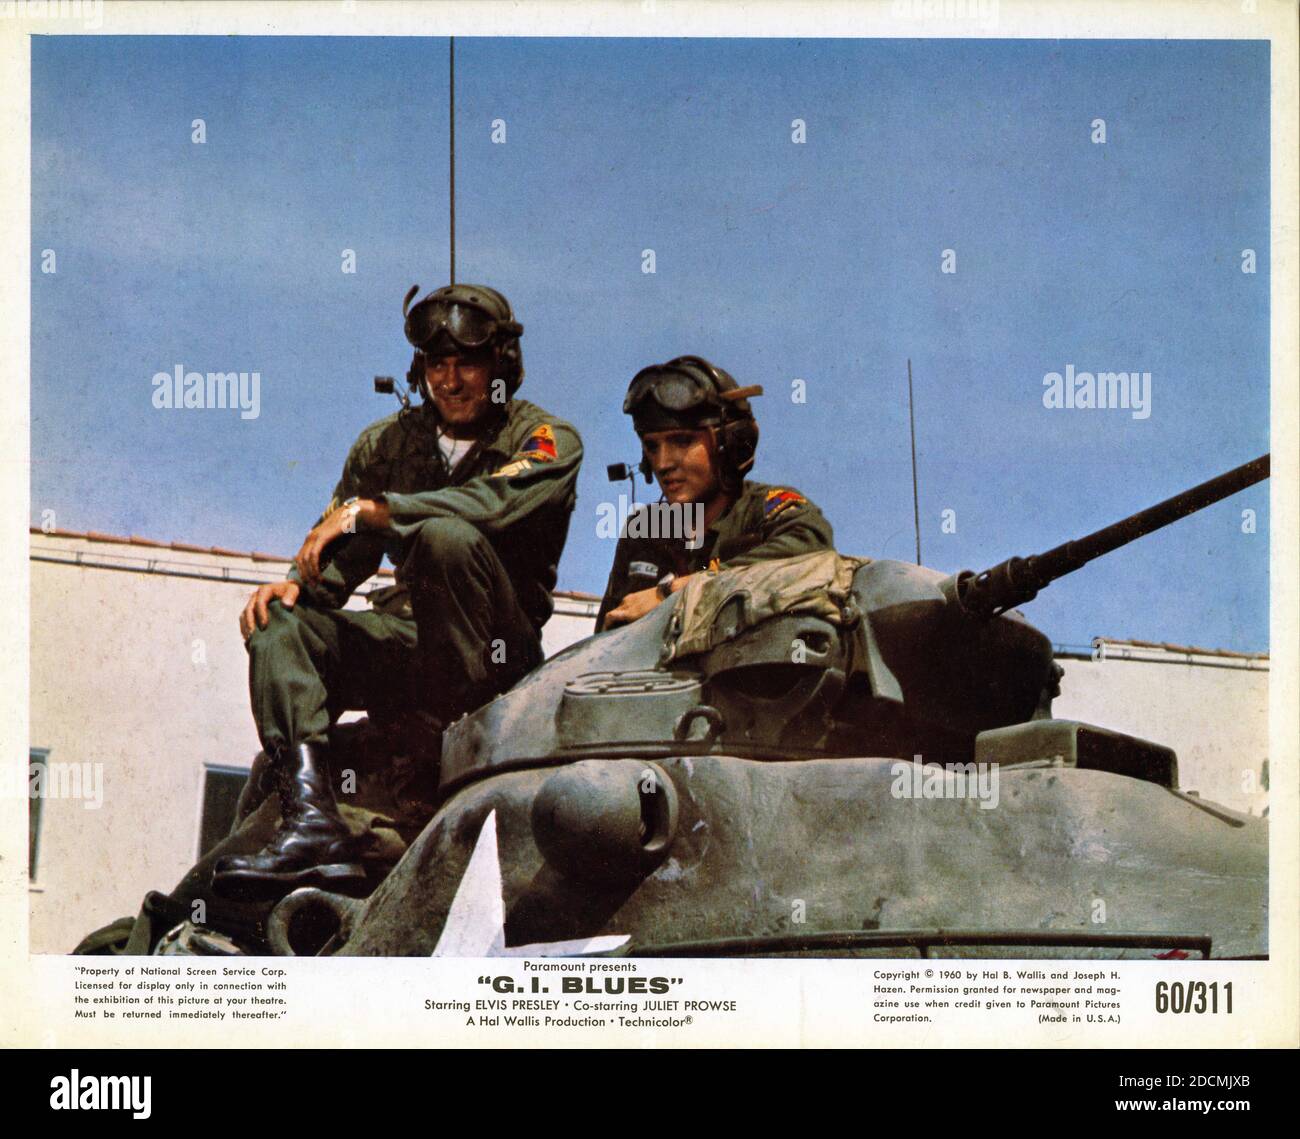 ELVIS PRESLEY in Tank in G. I. BLUES 1960 director NORMAN TAUROG costume design Edith Head Hal B. Wallis Productions / Paramount Pictures Stock Photo